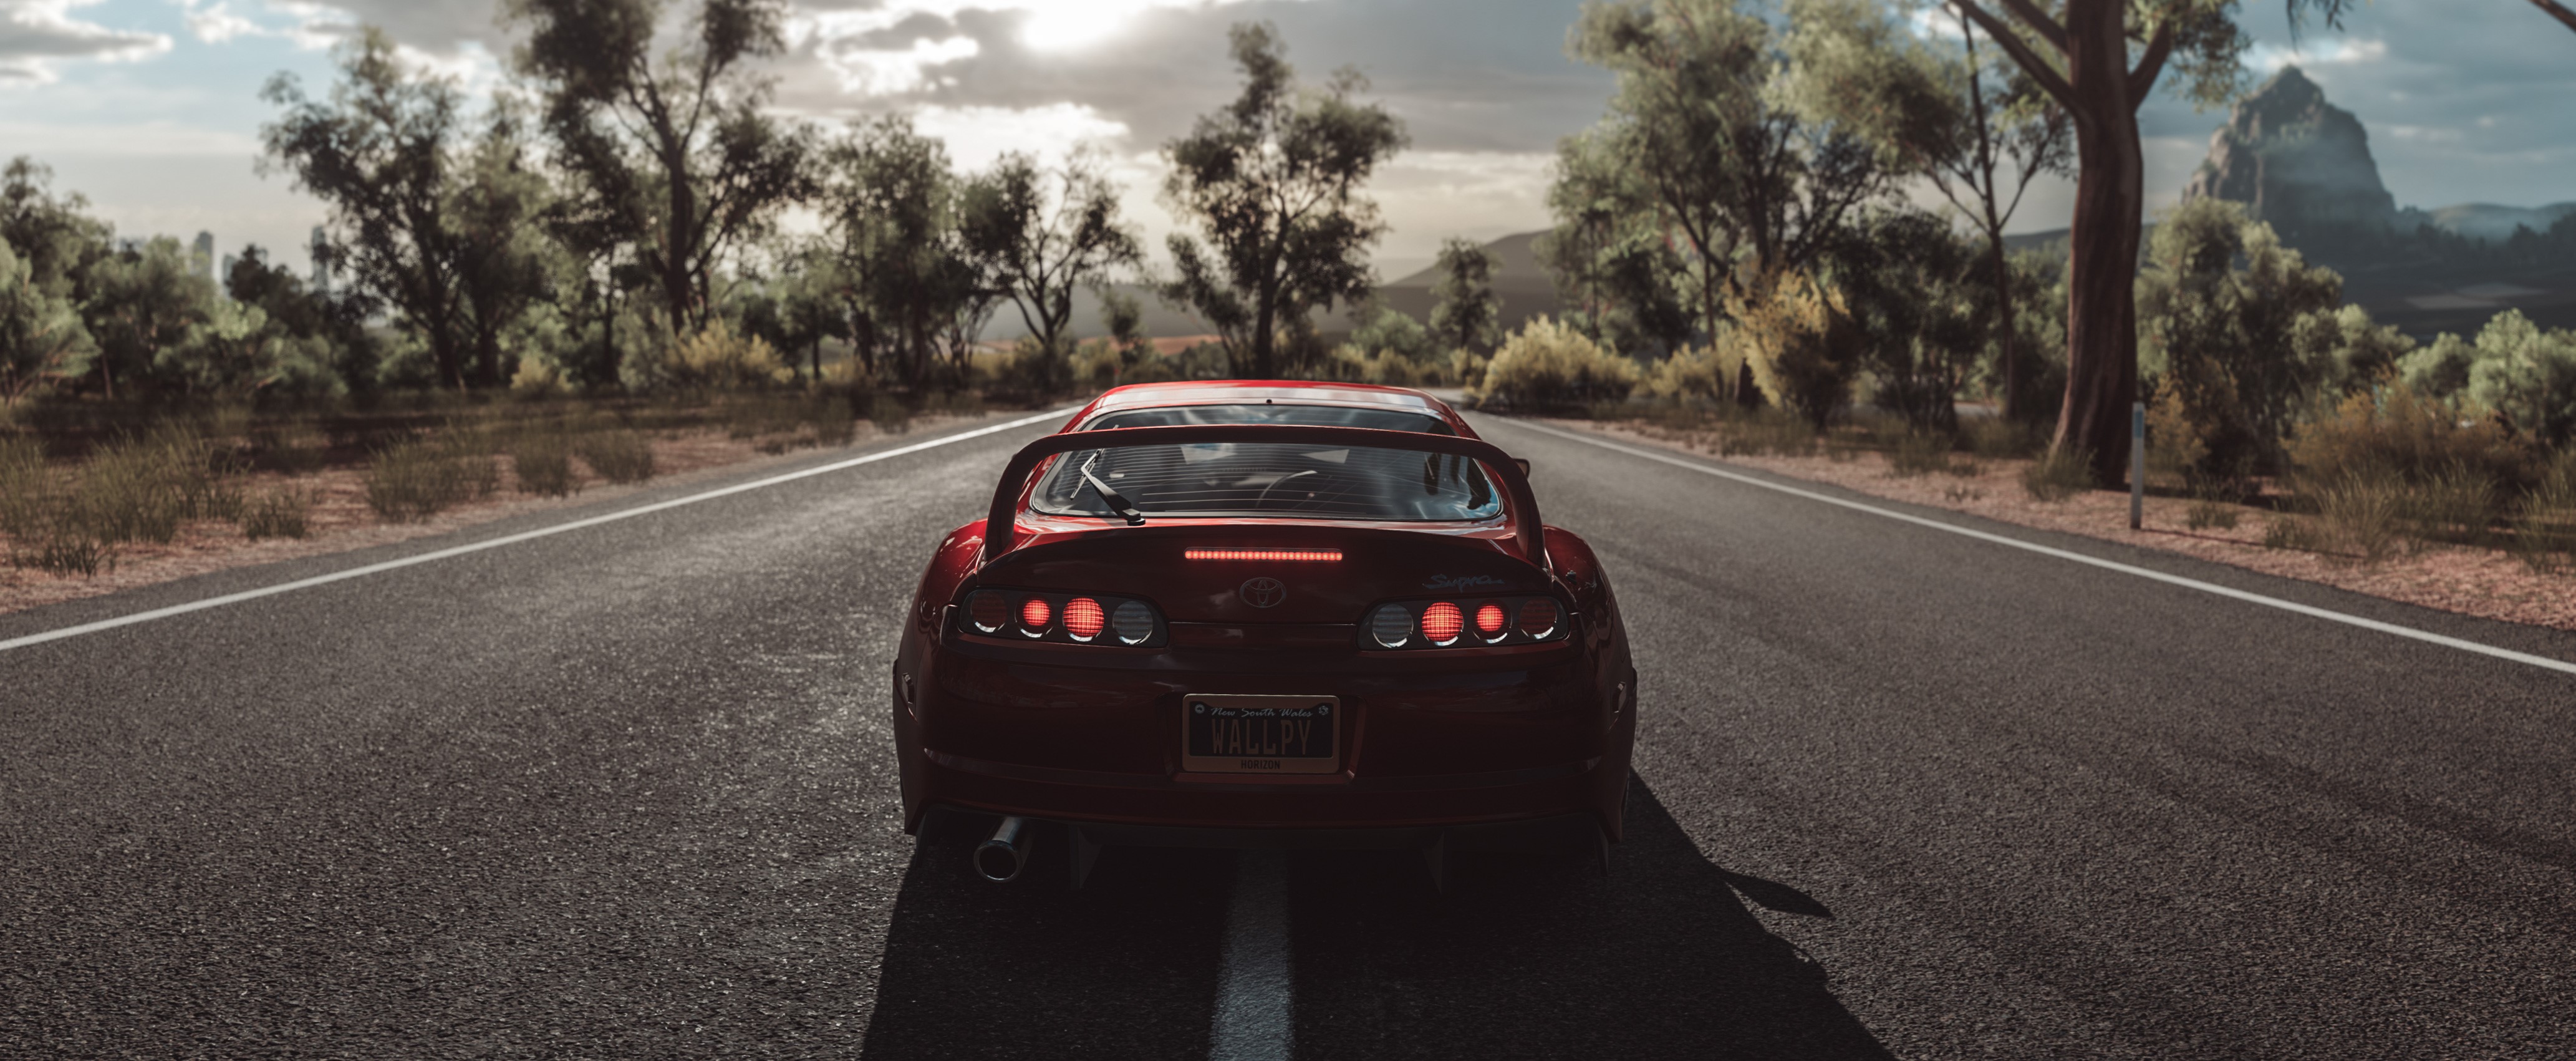 Toyota supra p k k full hd wallpapers backgrounds free download wallpaper crafter